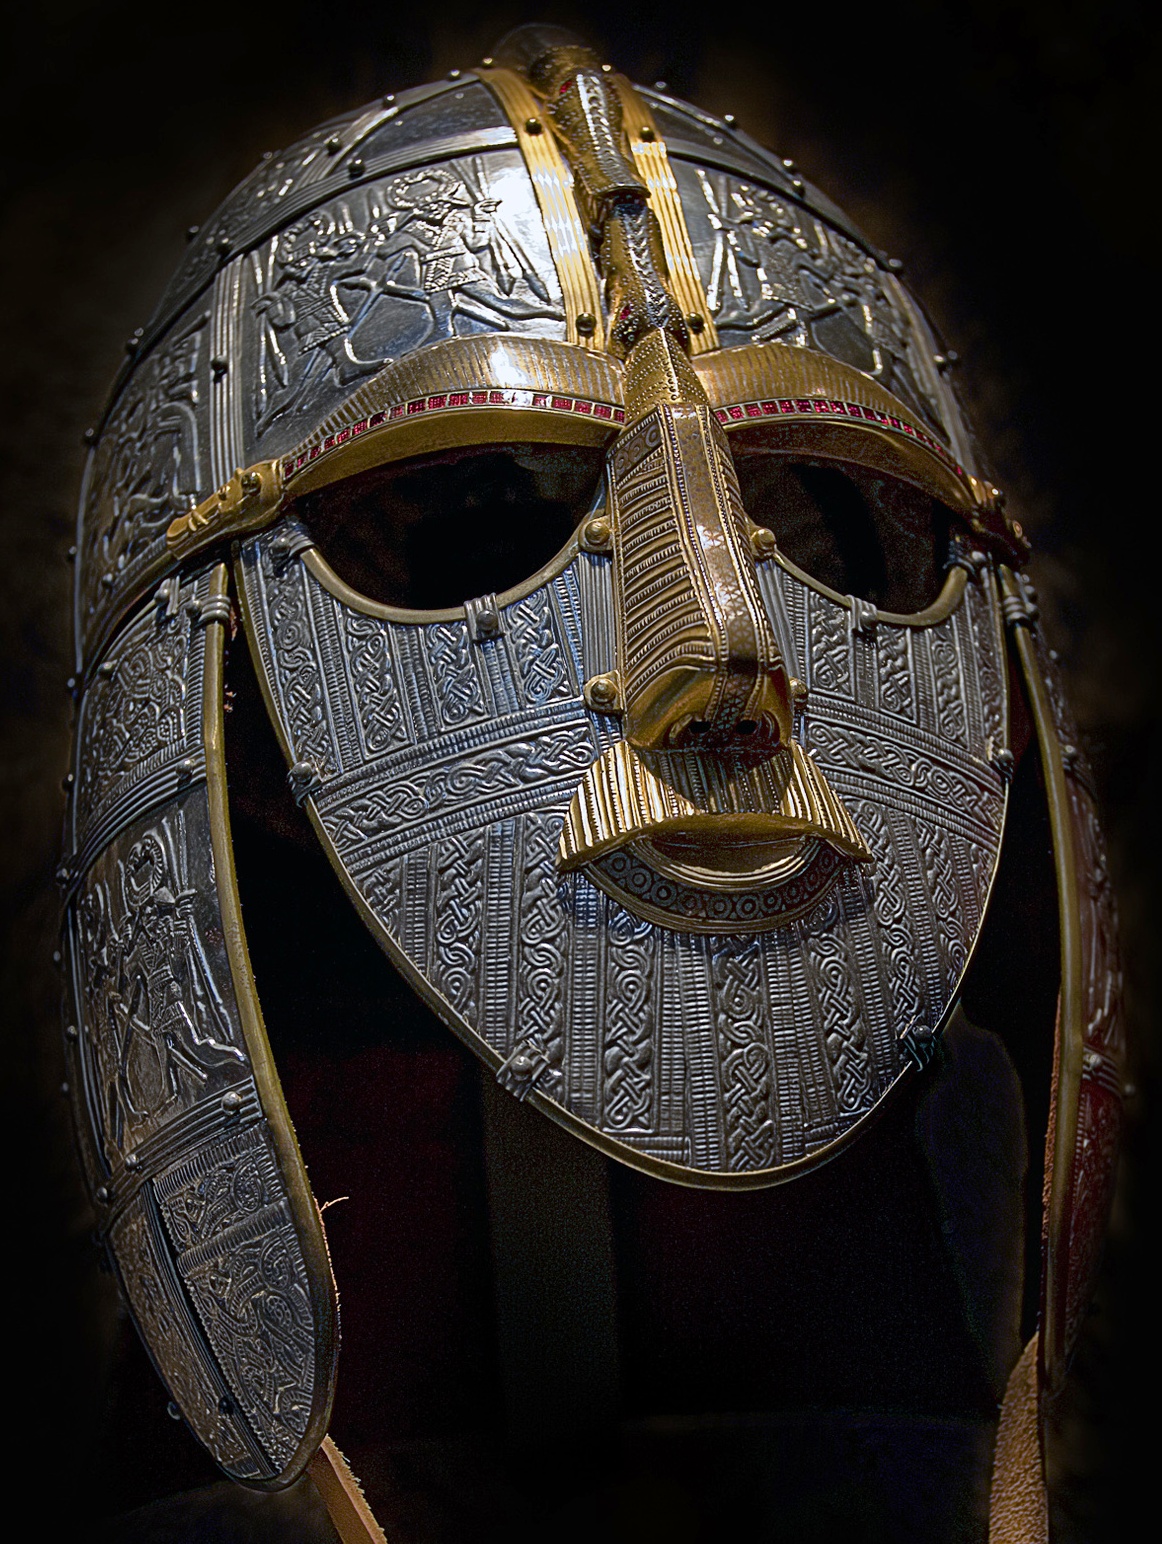 Reconstructed 1,400 year old Anglo-Saxon ceremonial burial mask